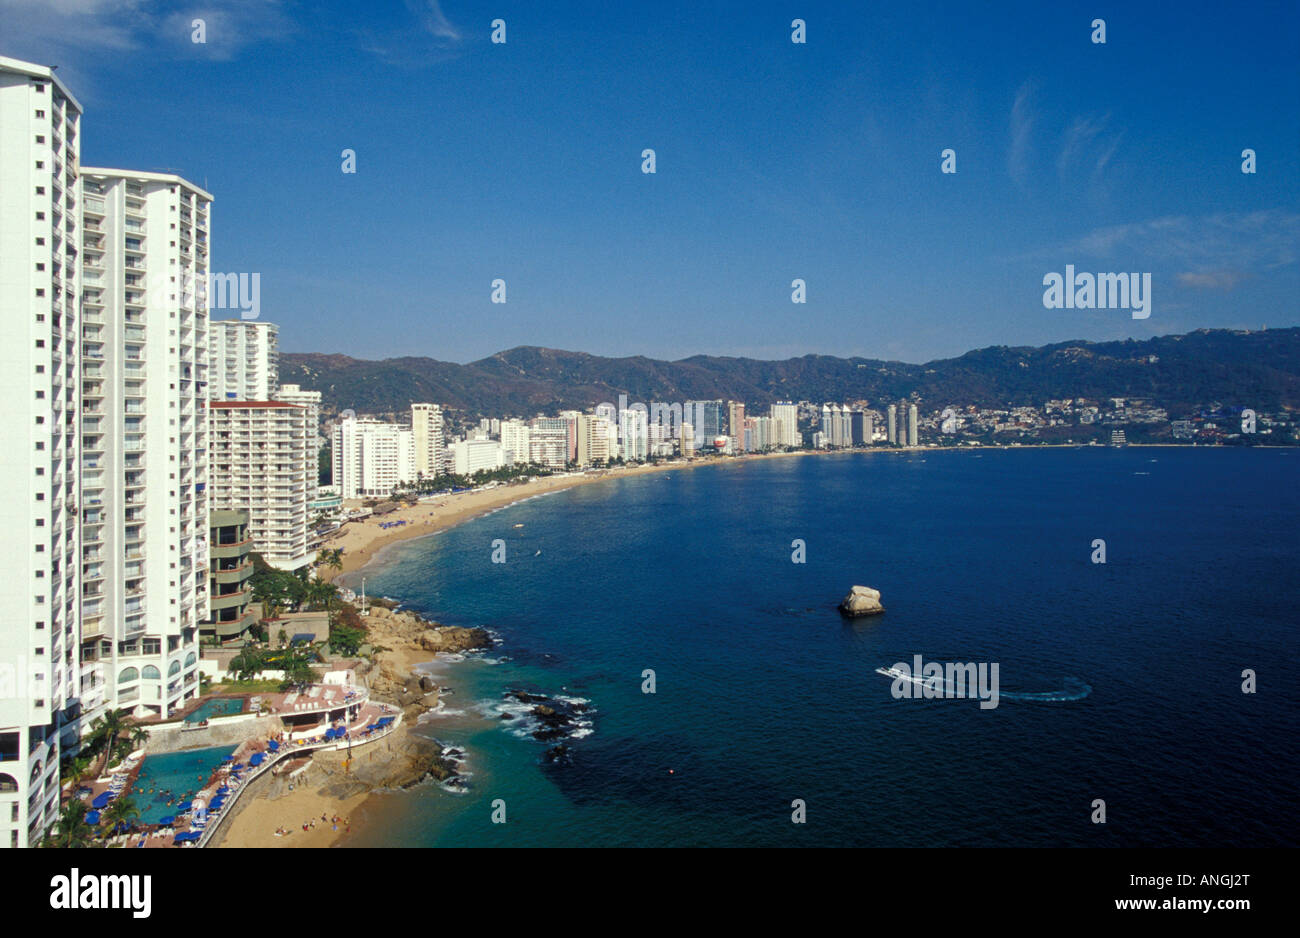 modern-high-rise-hotels-lining-acapulco-